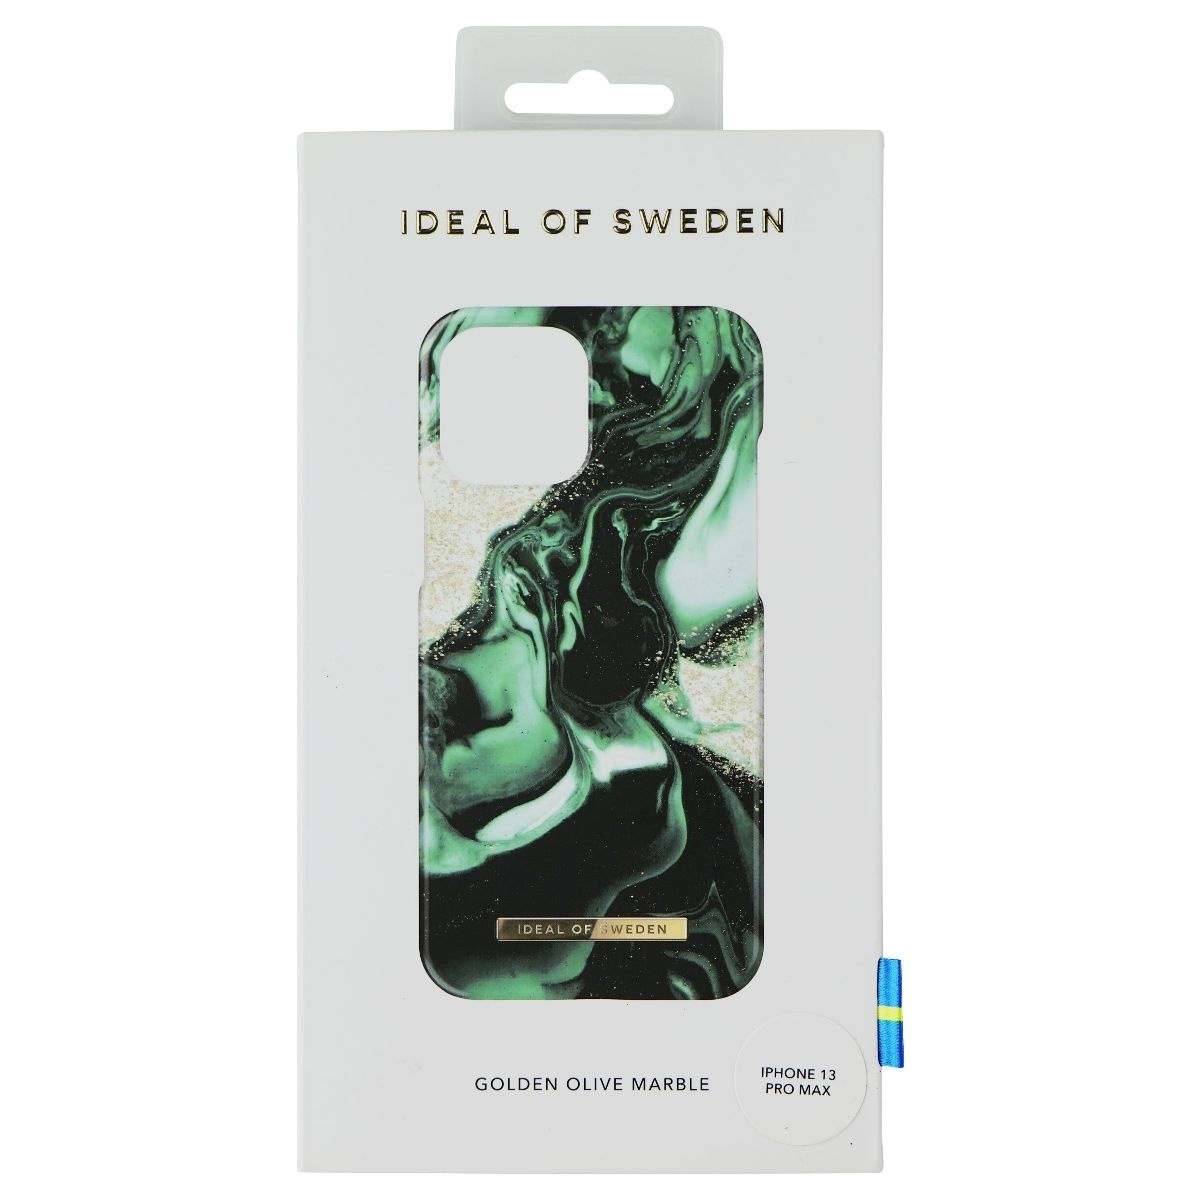 IDeal Of Sweden Printed Case For IPhone 13 Pro Max - Golden Olive Marble